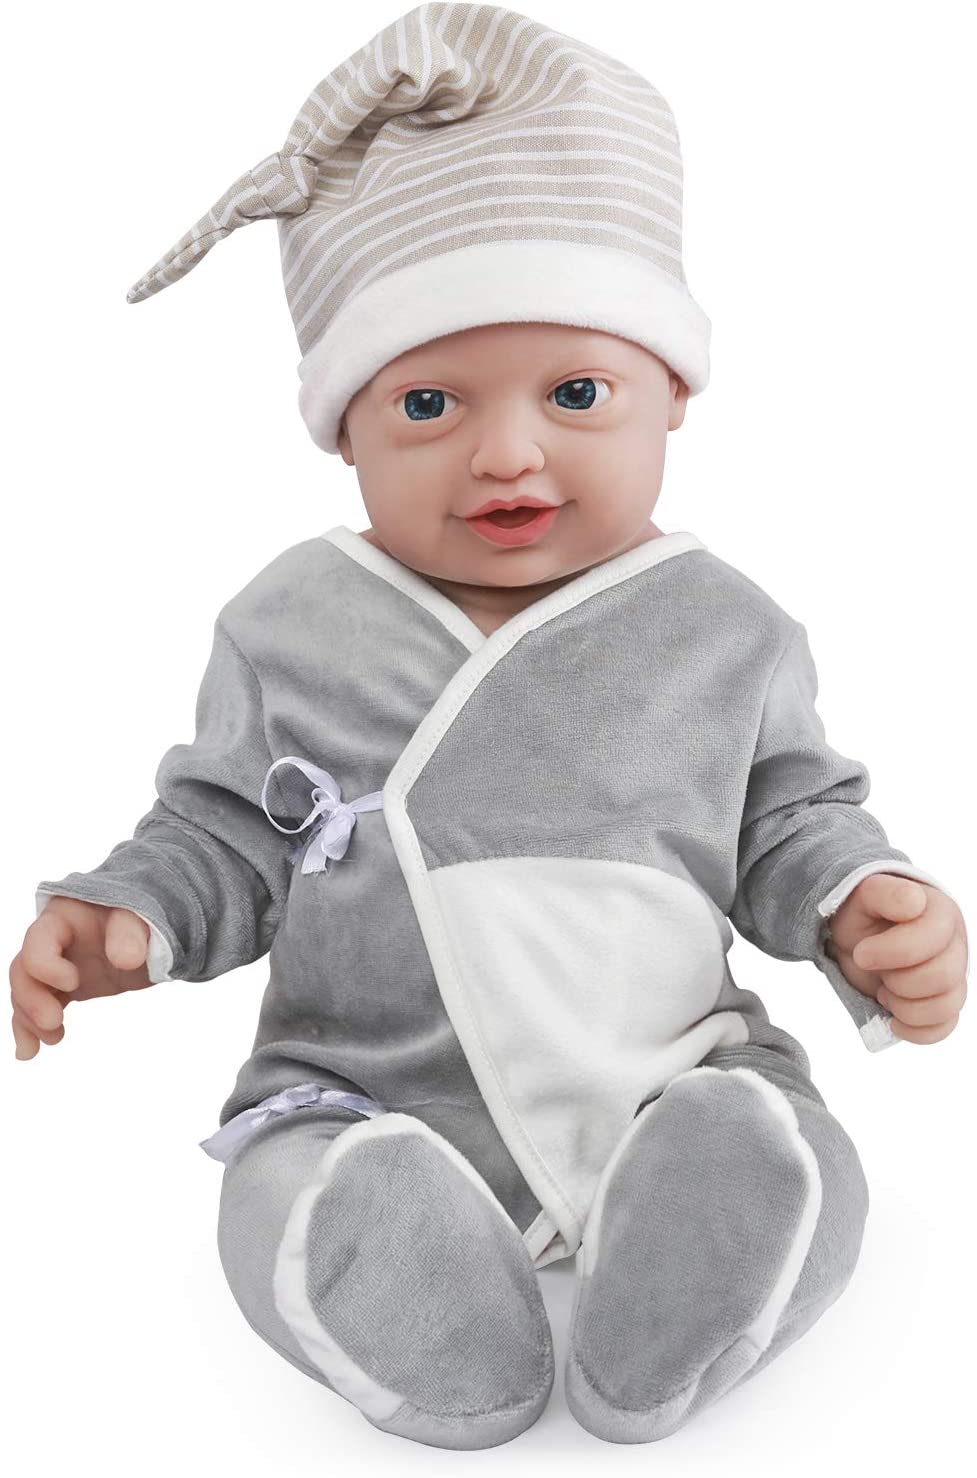 Vollence 23 inch Full Silicone Baby Dolls That Look Real,Not Vinyl Material Dolls,Real Full Body Silicone Baby Doll,Handmade Lifelike Newborn Baby Dolls Girl